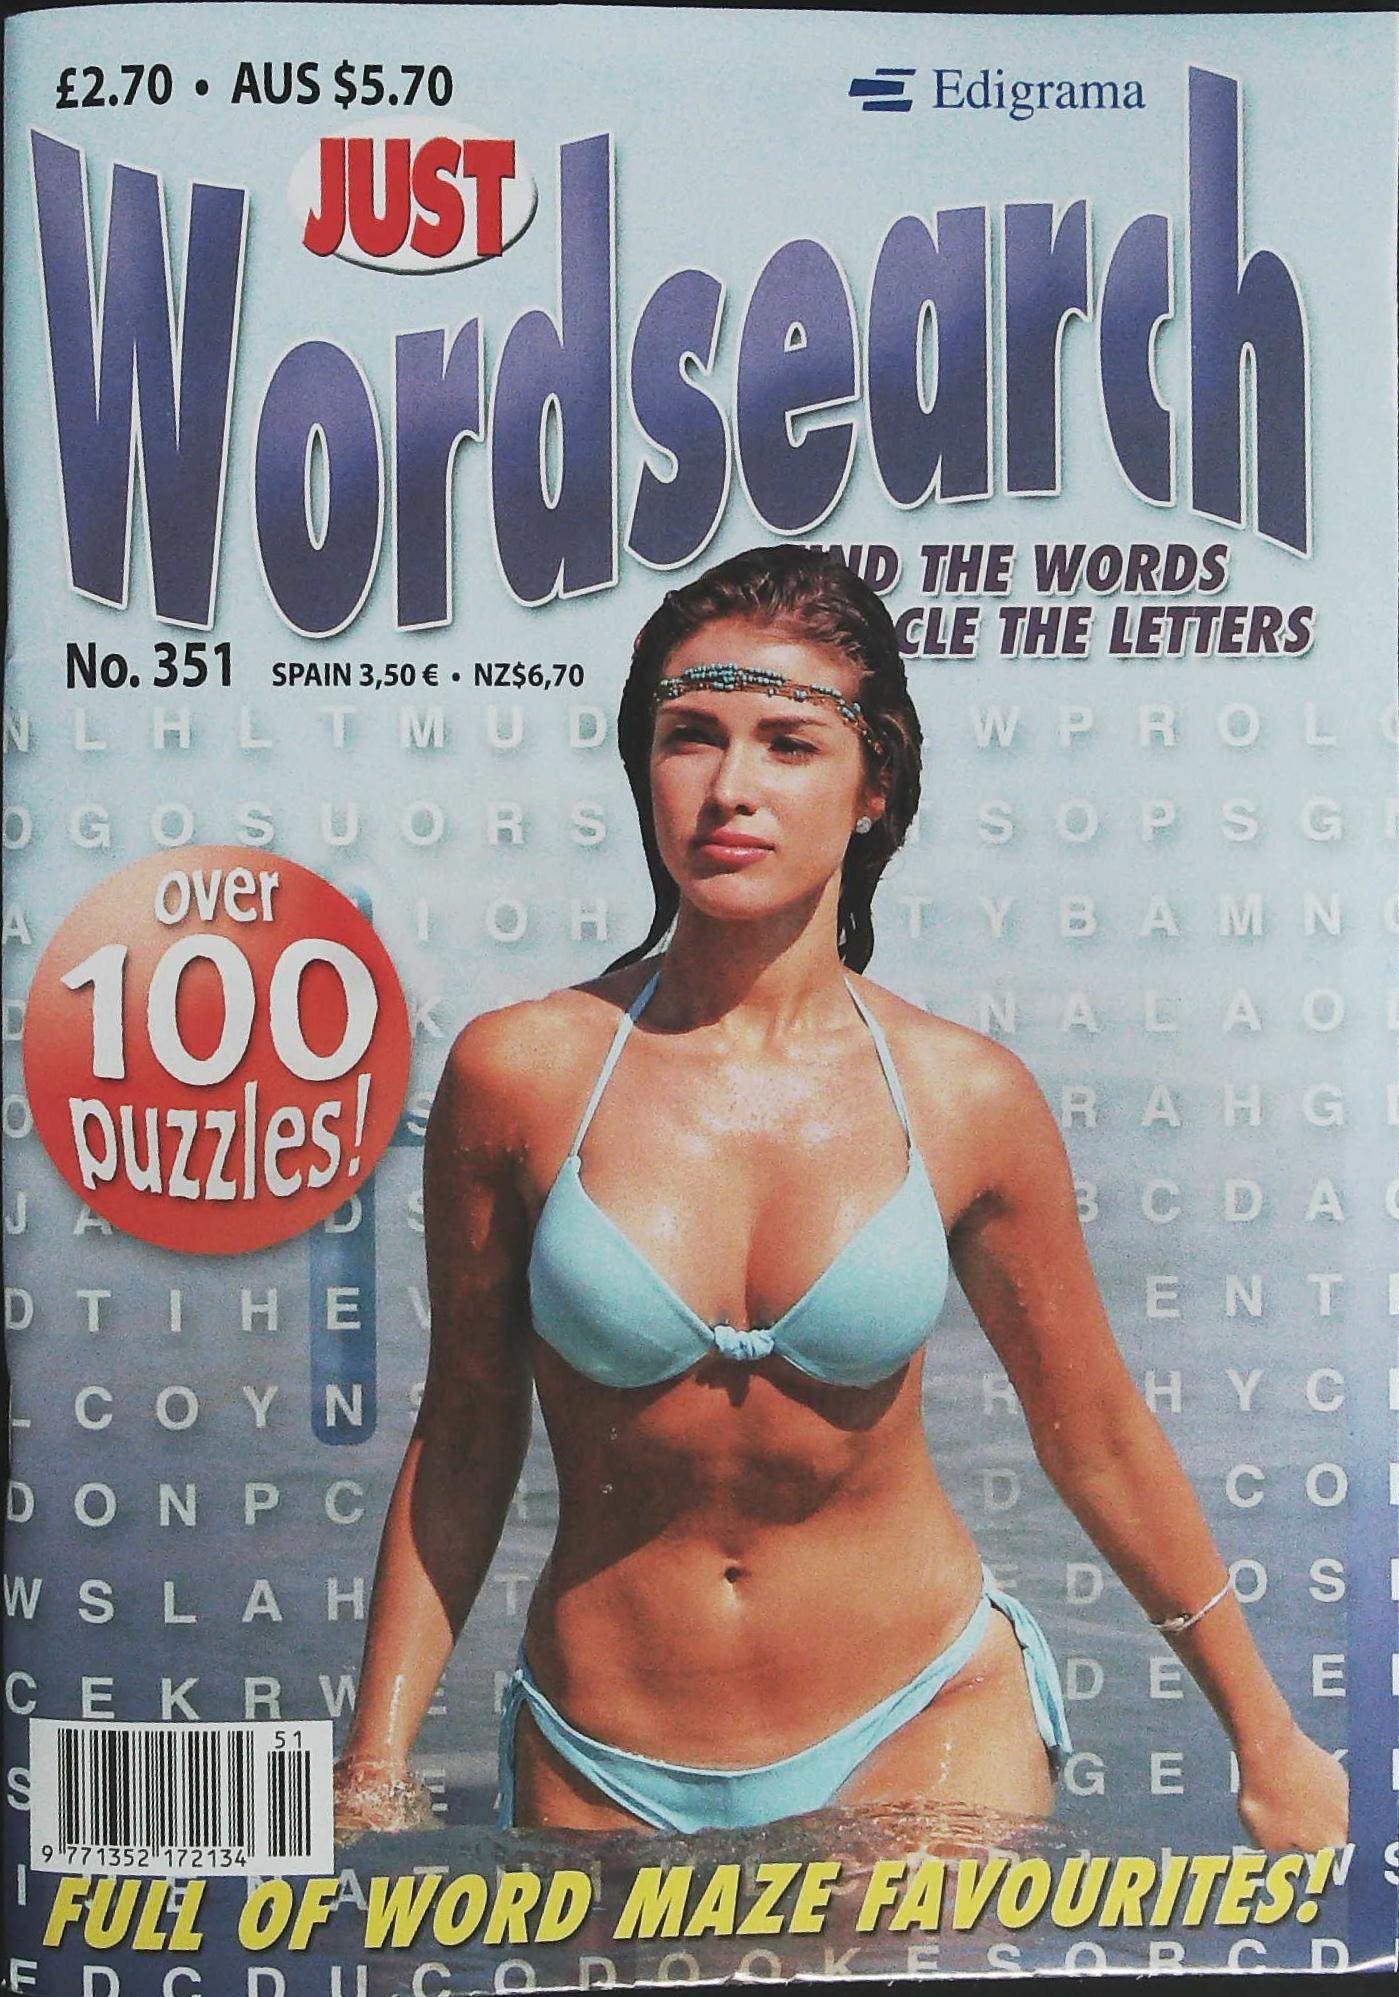 JUST WORDSEARCH